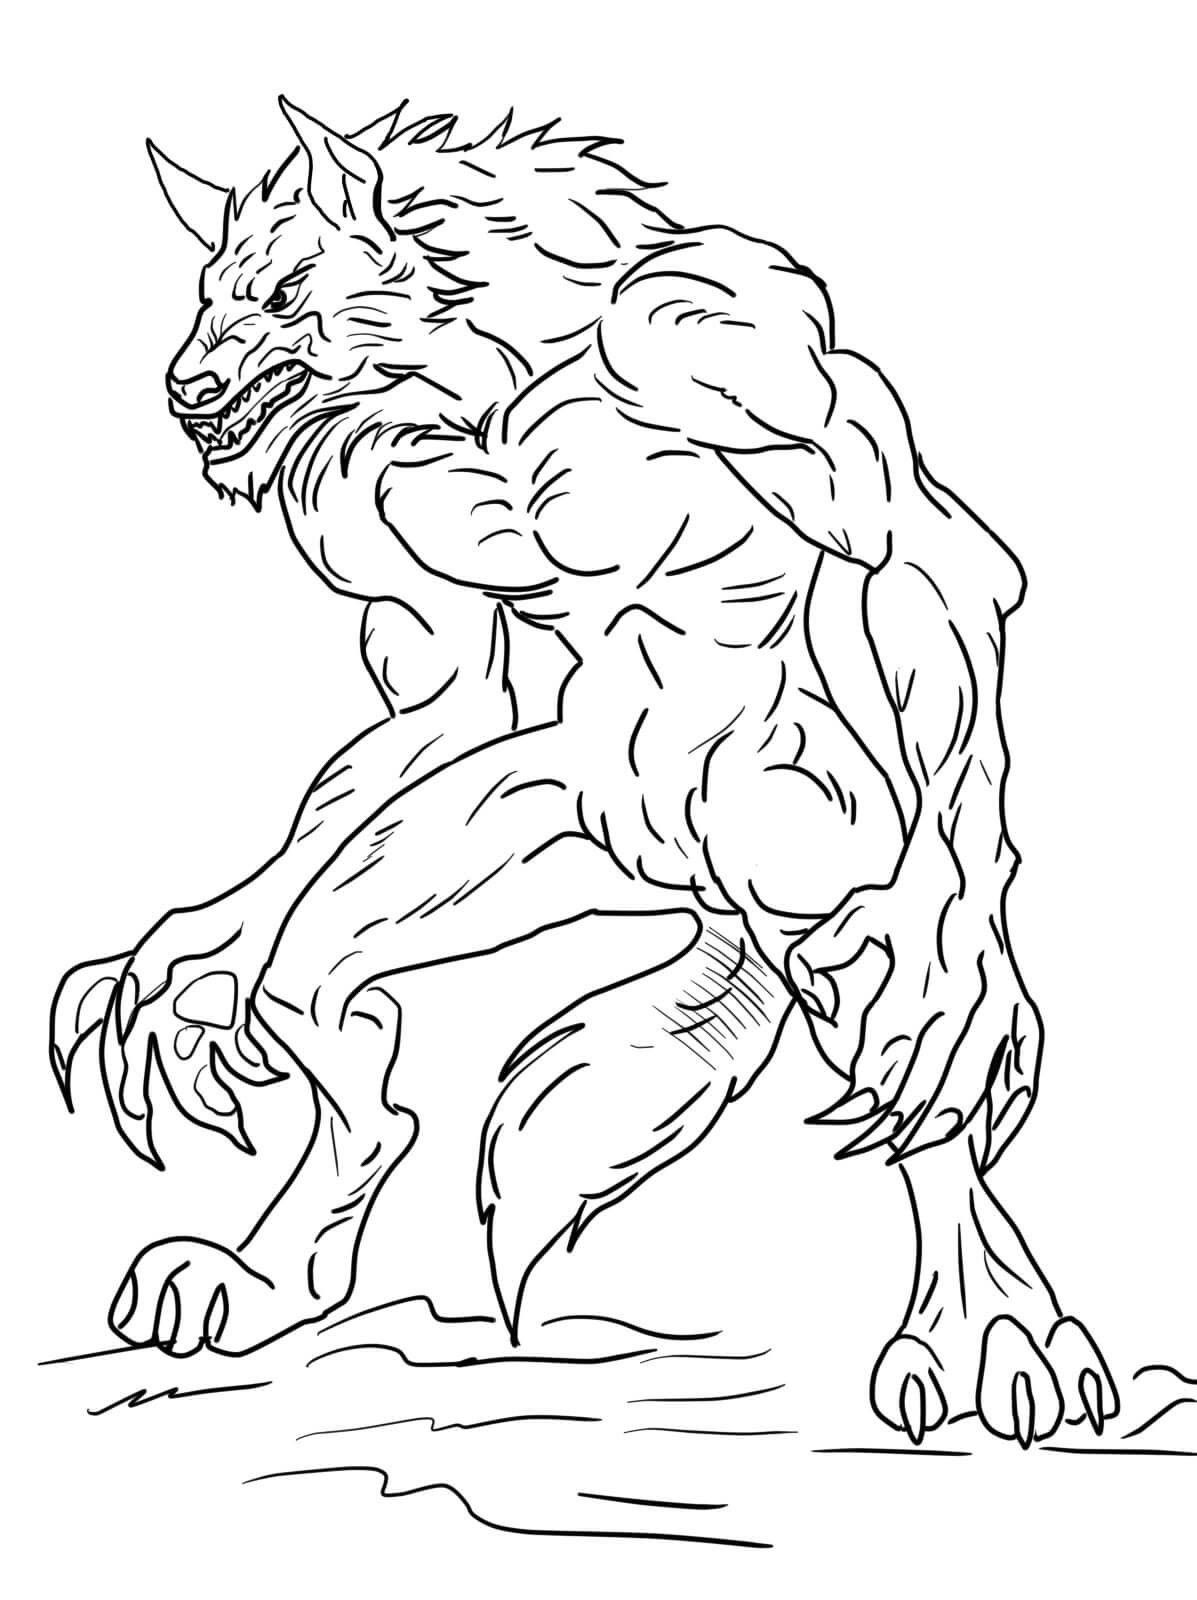 Free Werewolf Coloring Pages - Coloring Home